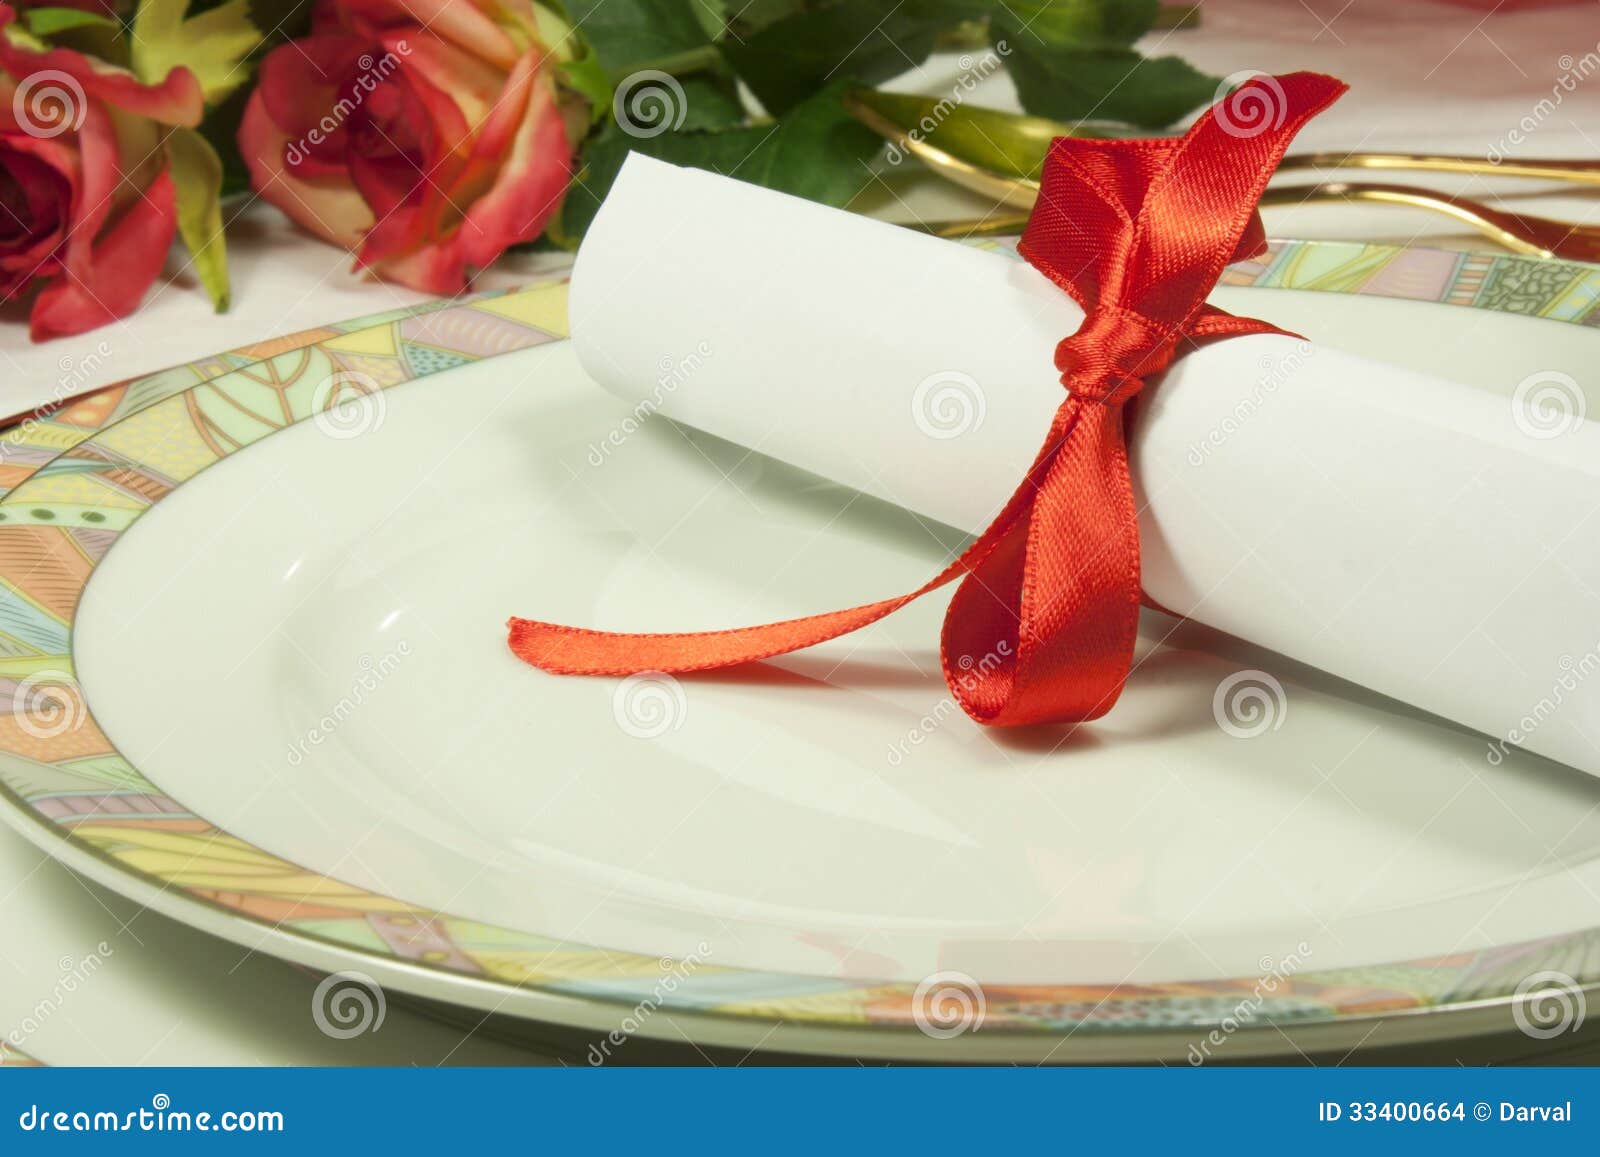 Anniversary stock photo. Image of placemat, gift, engagement - 33400664